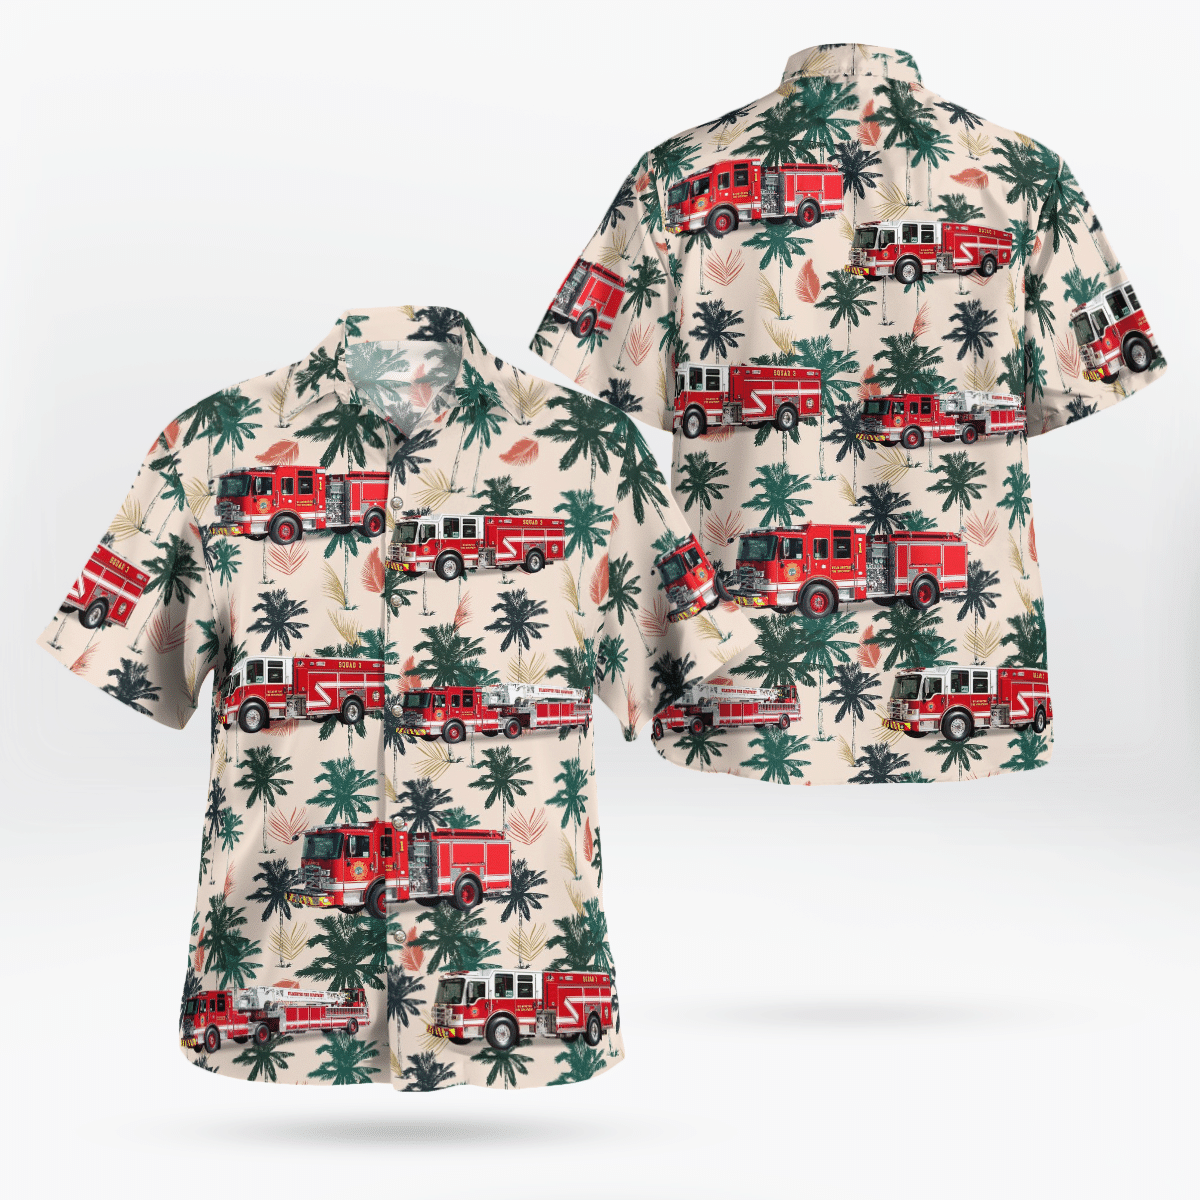 If you are in need of a new summertime look, pick up this Hawaiian shirt 52